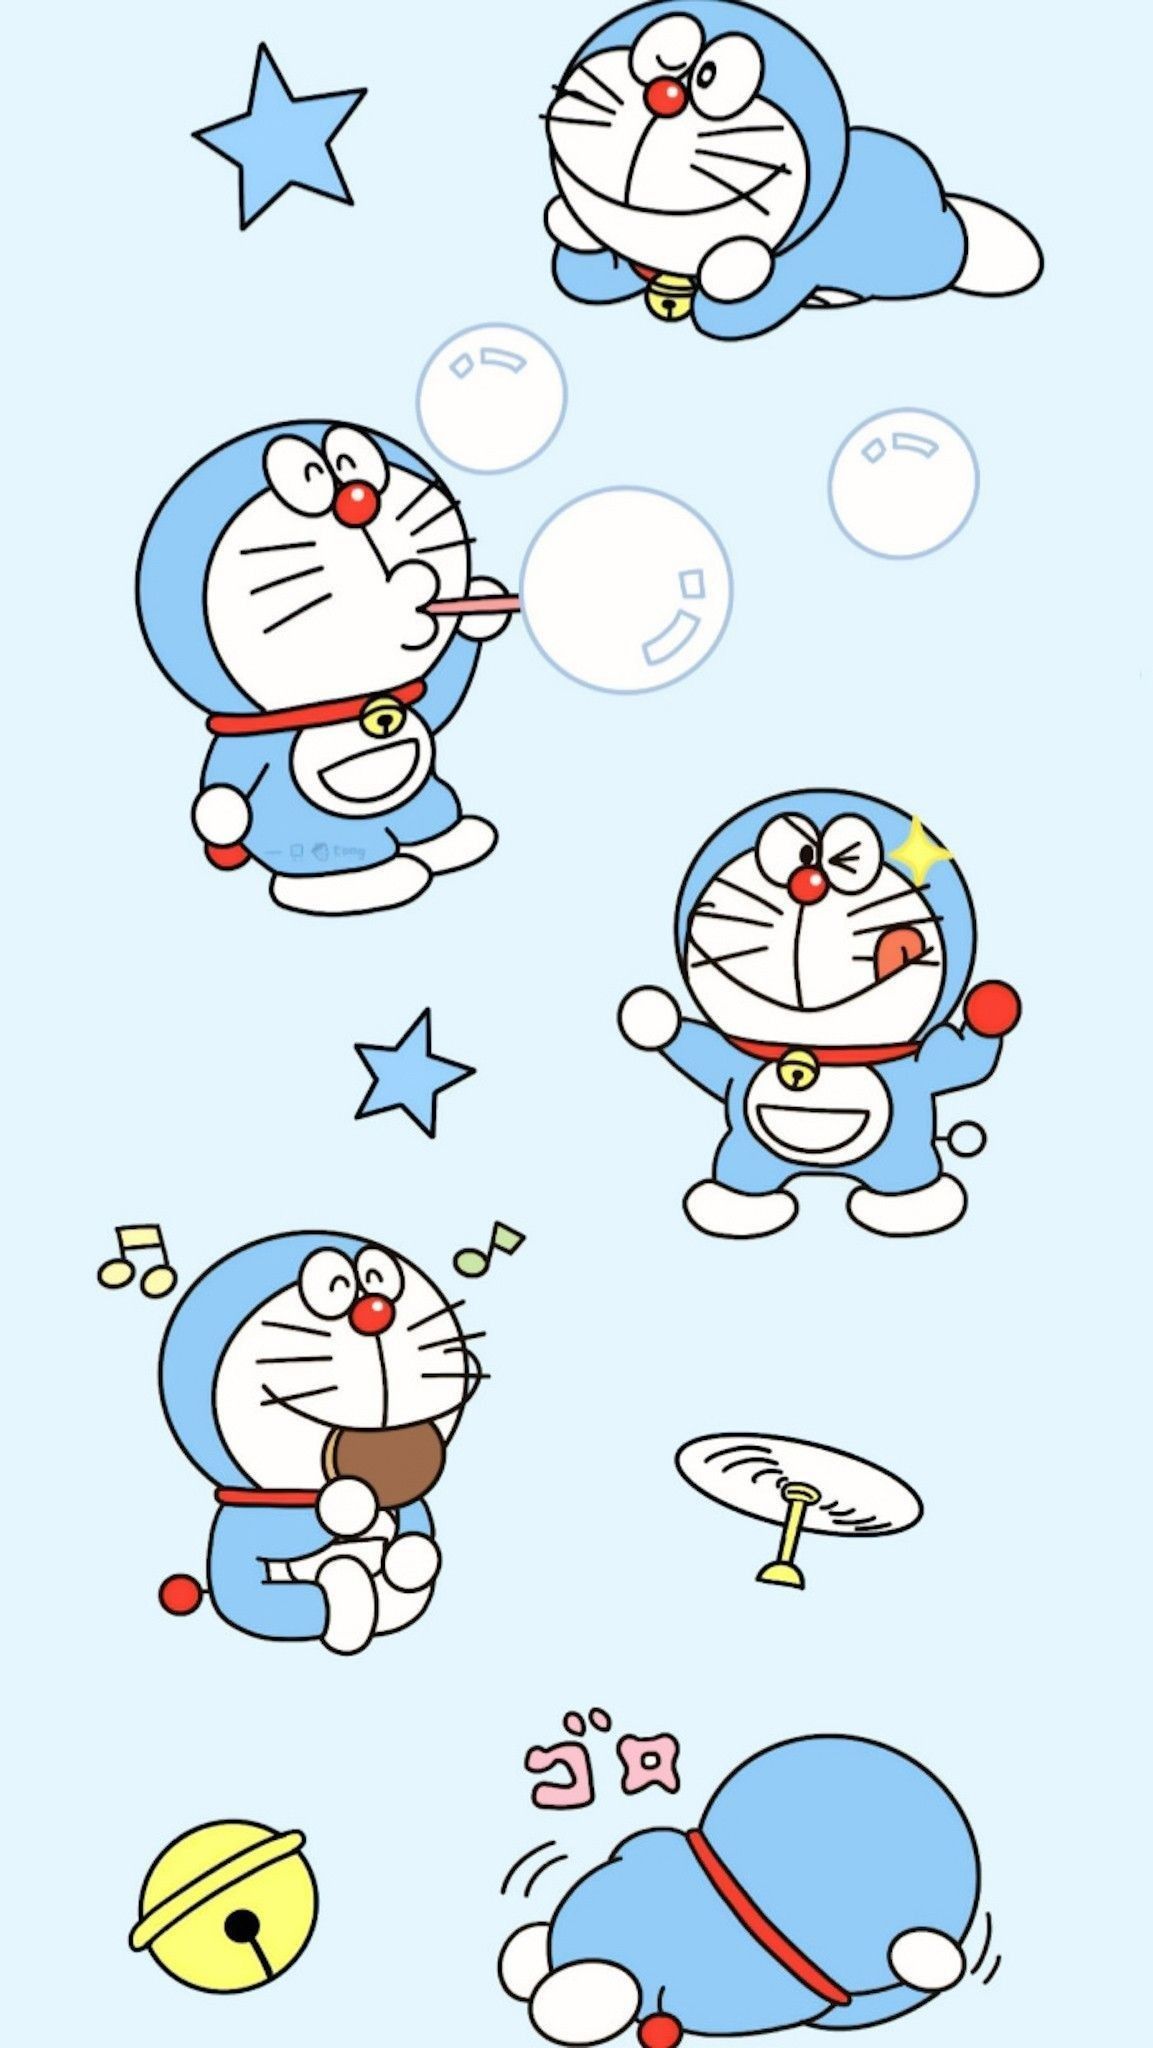 A cartoon character is shown in different poses - Doraemon